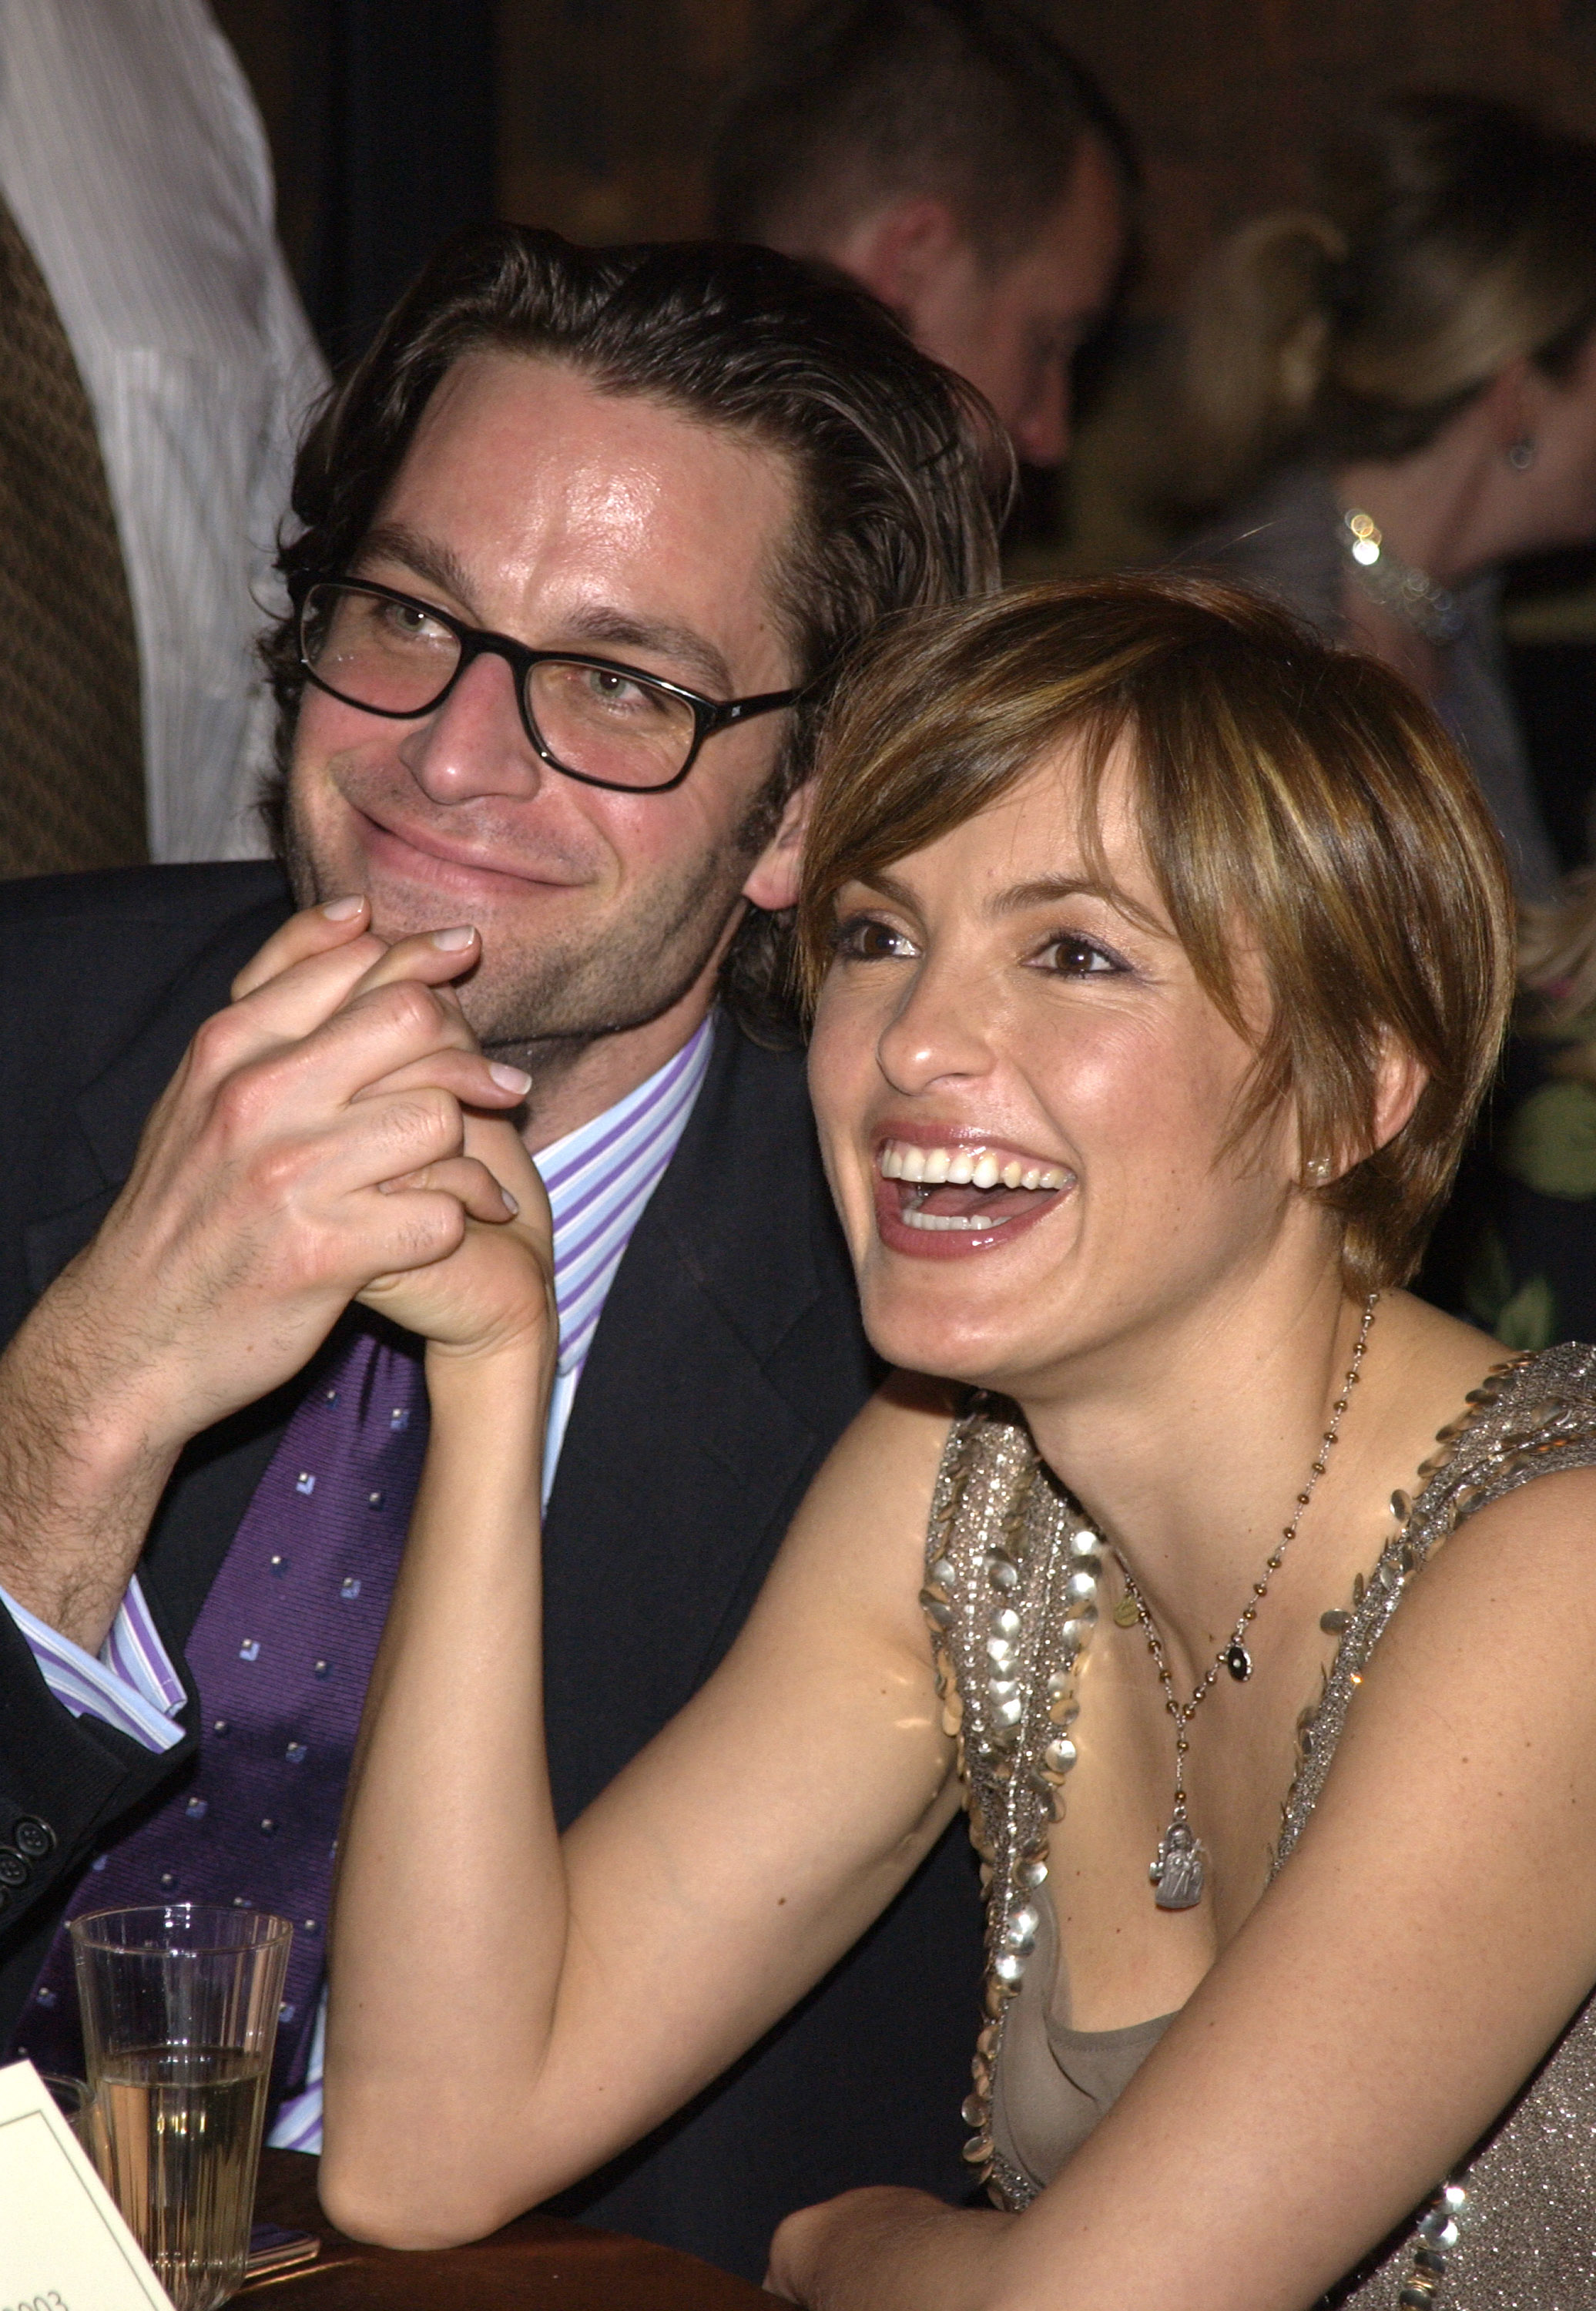 Peter Herman and Mariska Hargitay during Entertainment Weekly's 9th Annual Academy Awards viewing party at Elaine's on March 23, 2003 in New York City | Source: Getty Images